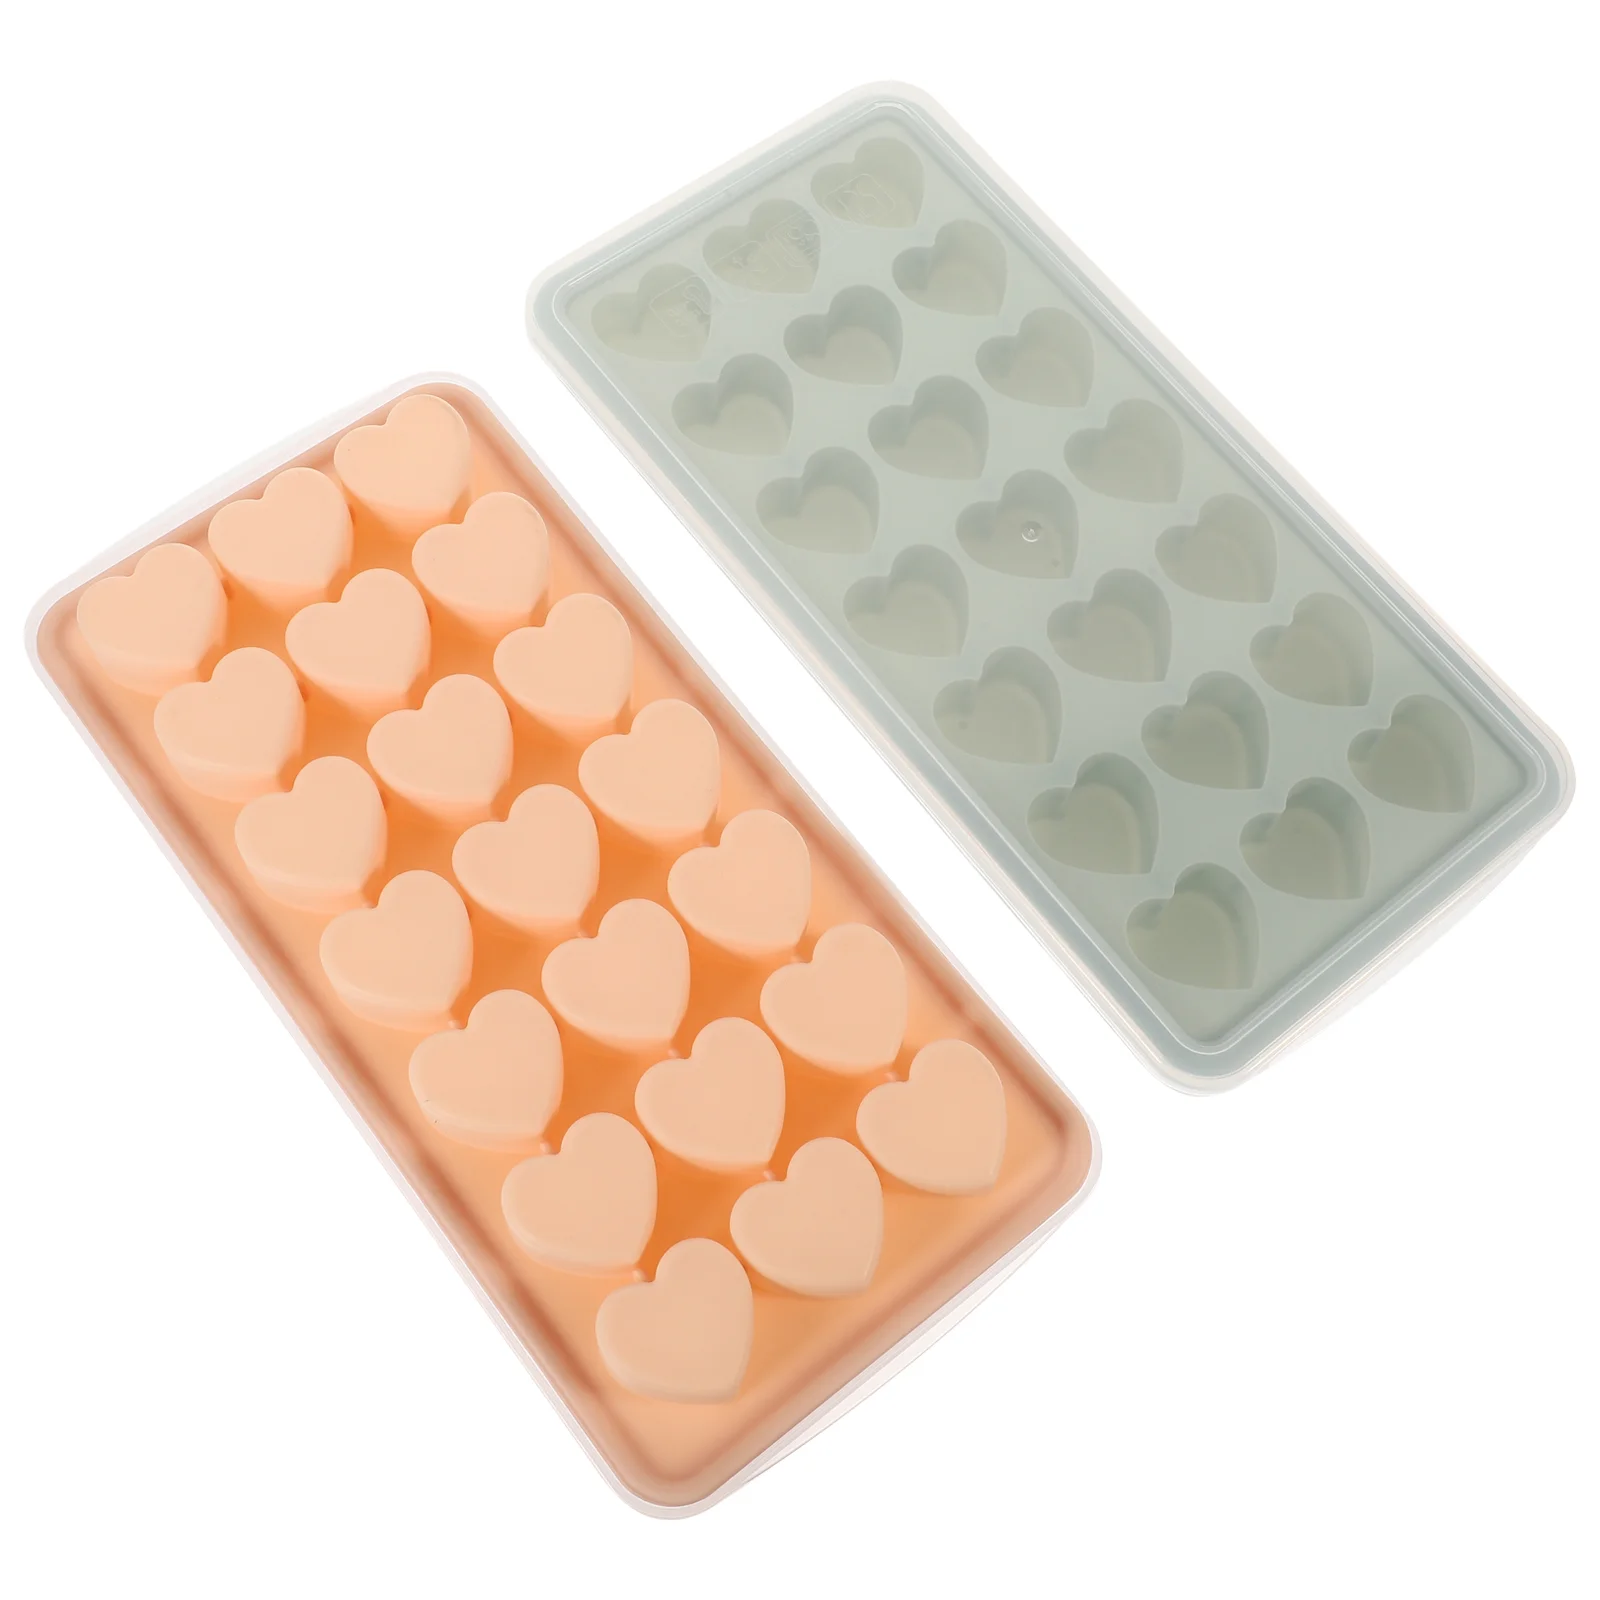 

2 Pcs Bath Tray Silicone Heart Shaped Ice Cube Trays for Freezer with Lid Lids Pudding Molds Convenient